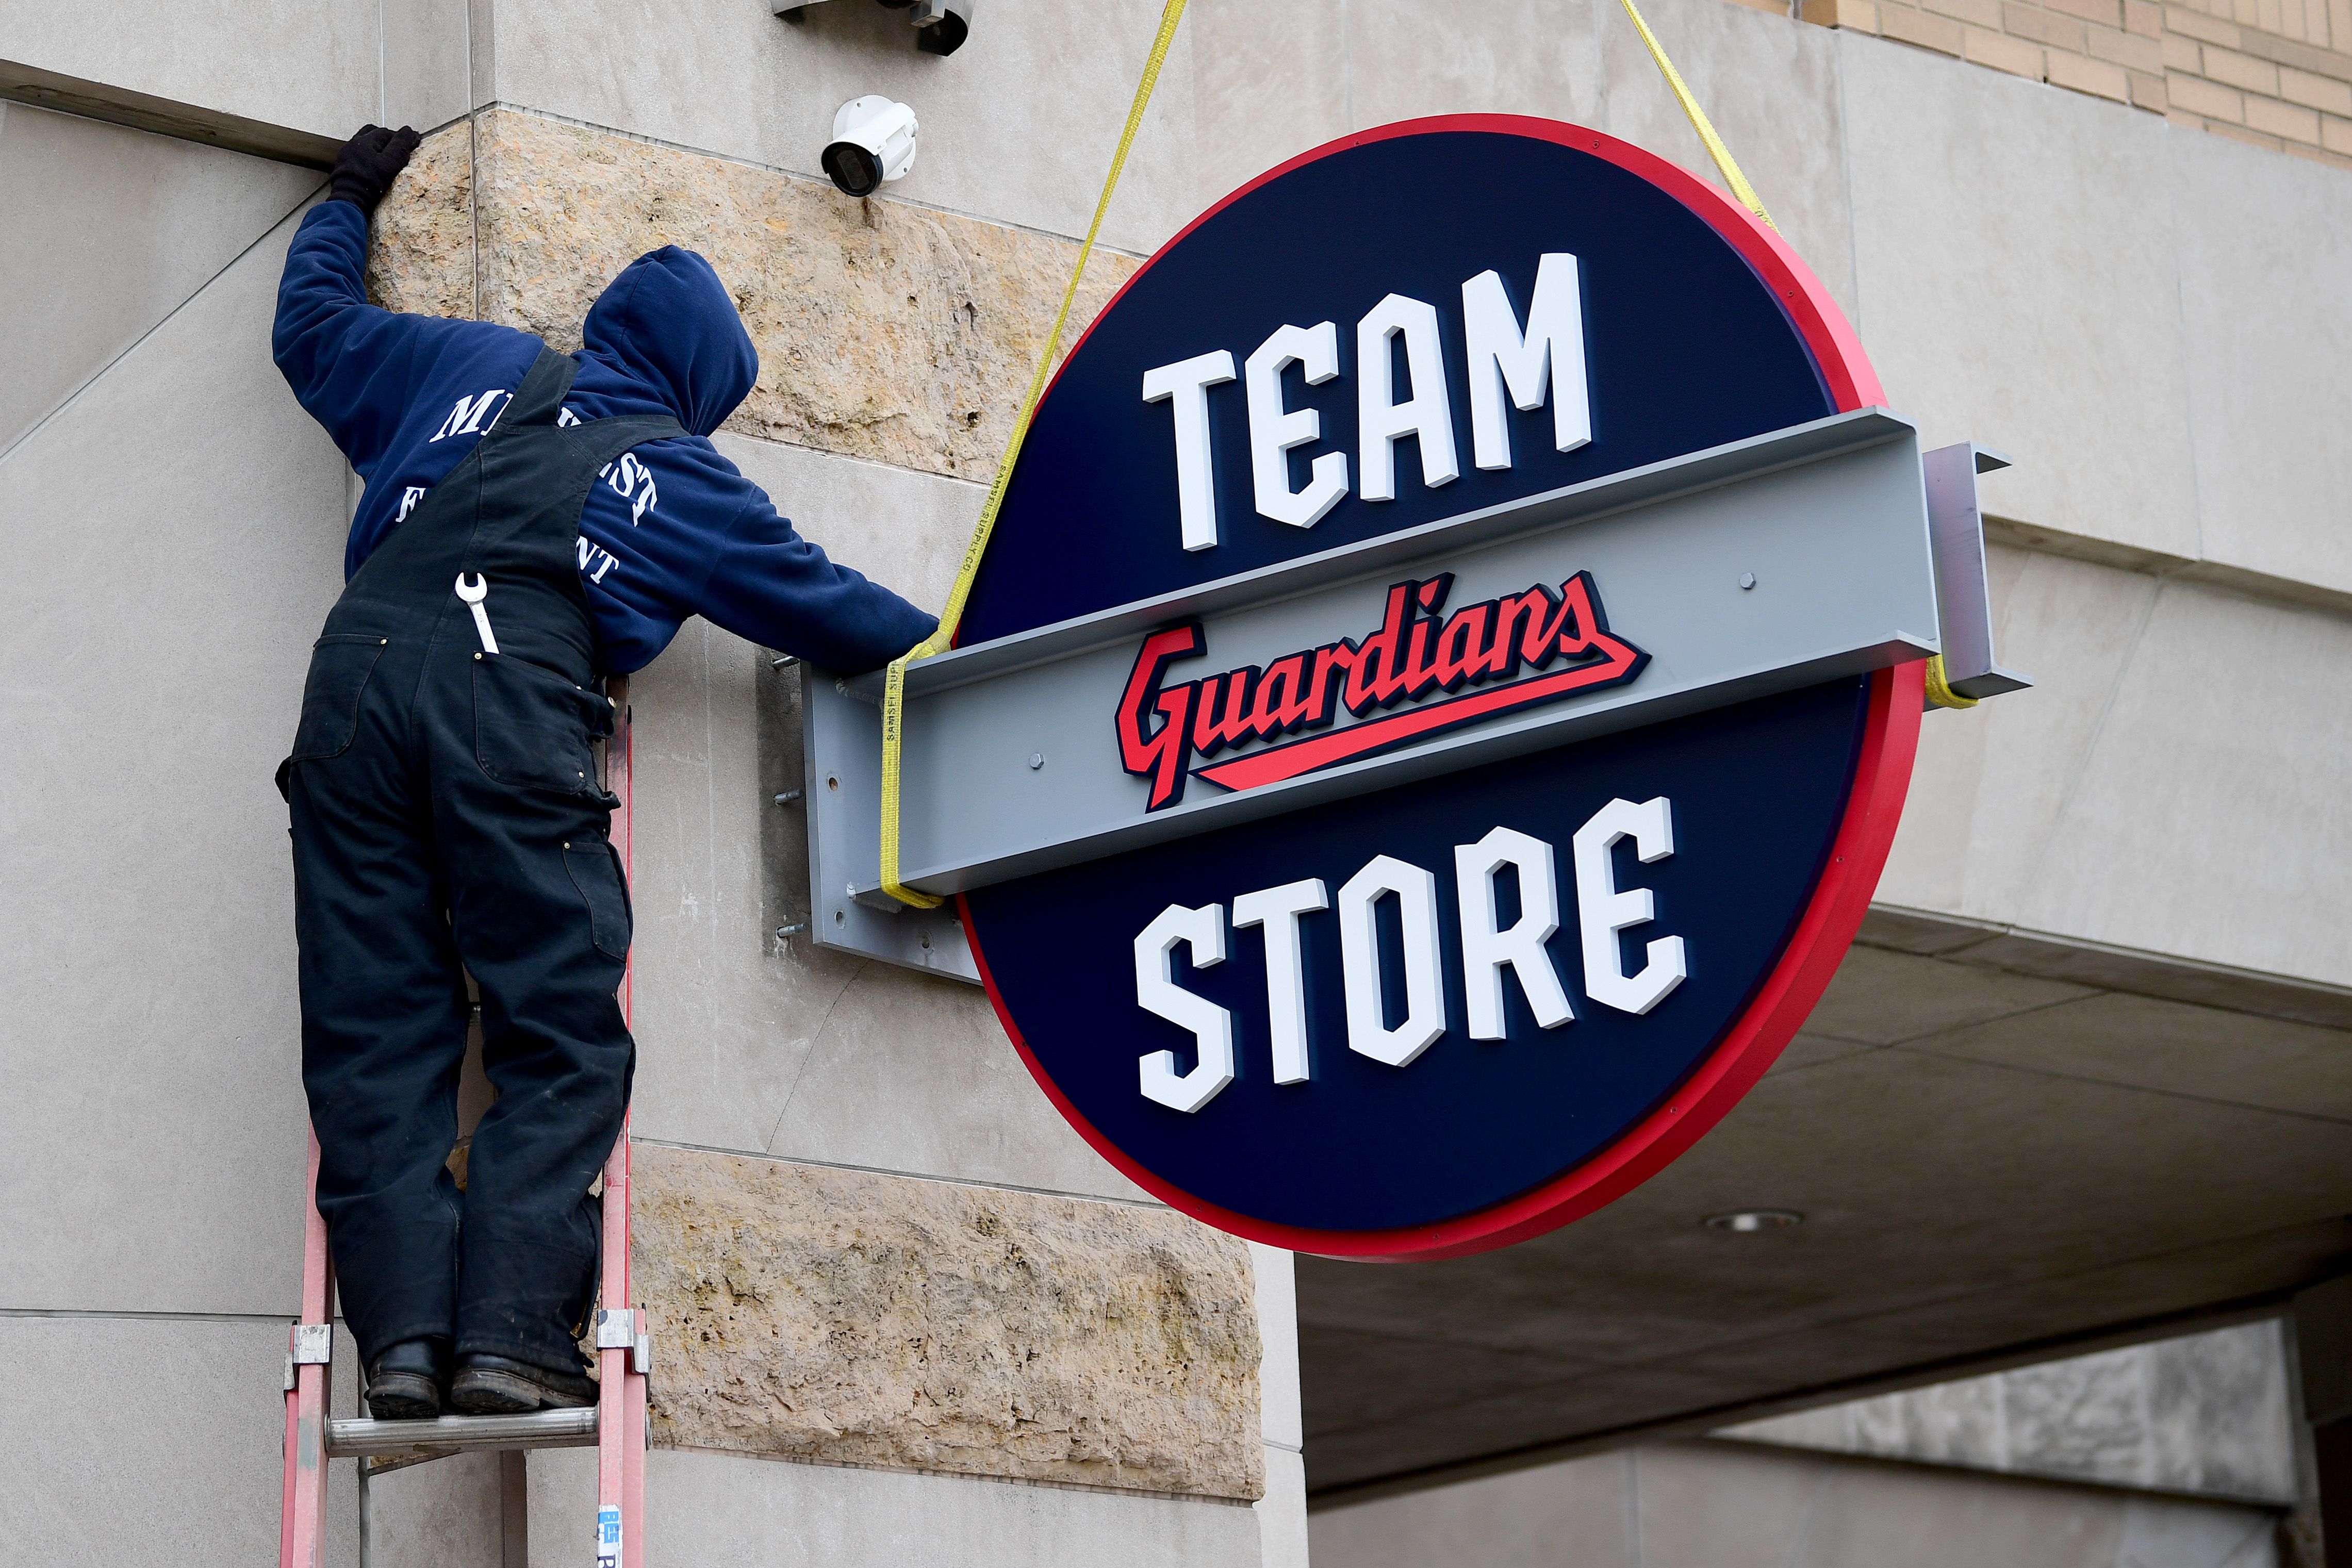 A worker installs the new "Guardians" team store sign in Cleveland. 